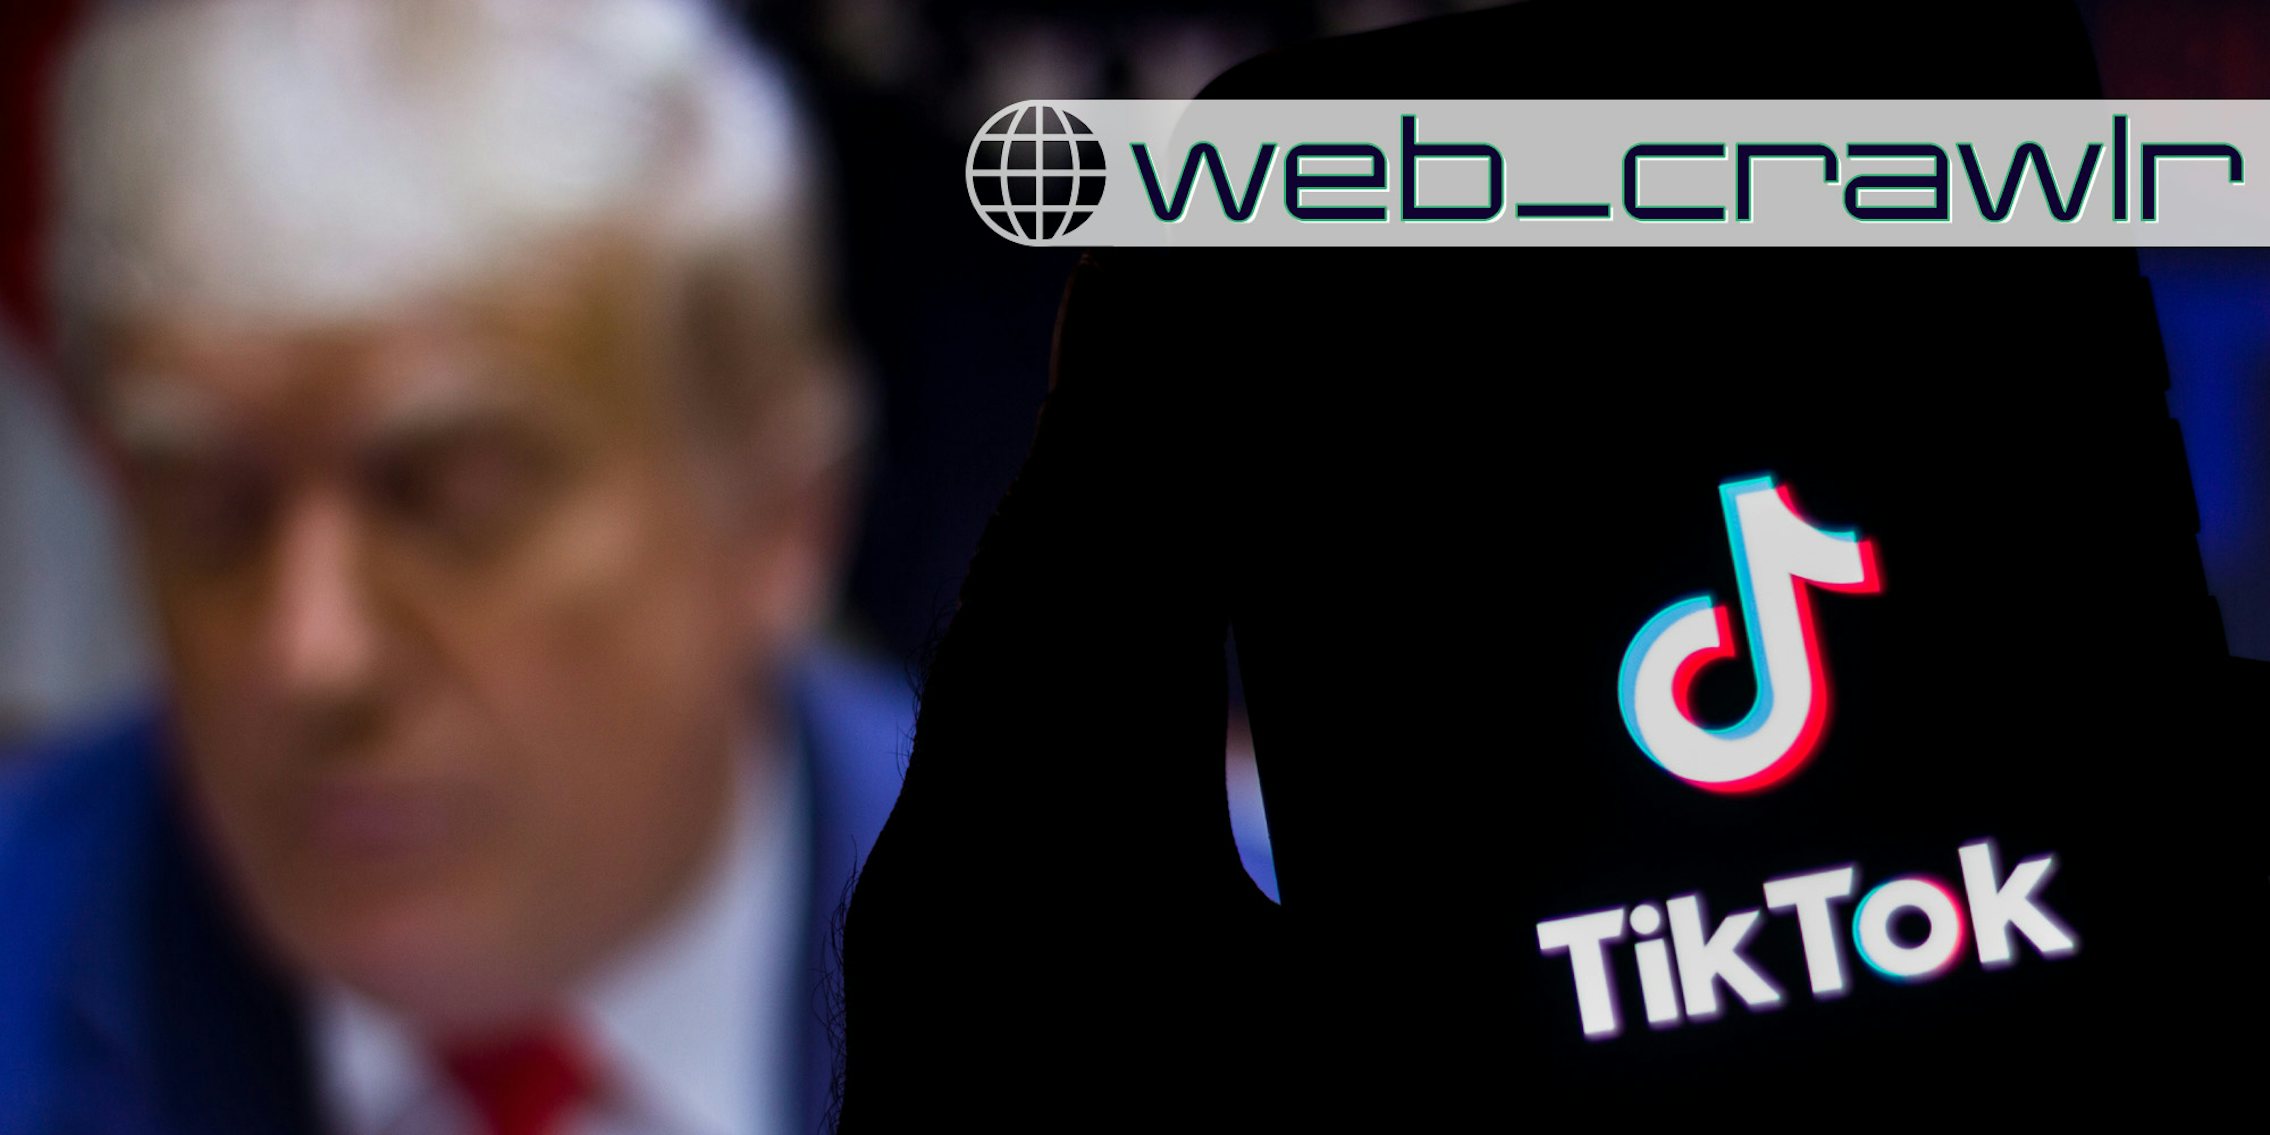 A phone with the TikTok logo on it. In the background is a blurred photo of former President Donald Trump. The Daily Dot newsletter web_crawlr logo is in the top right corner.